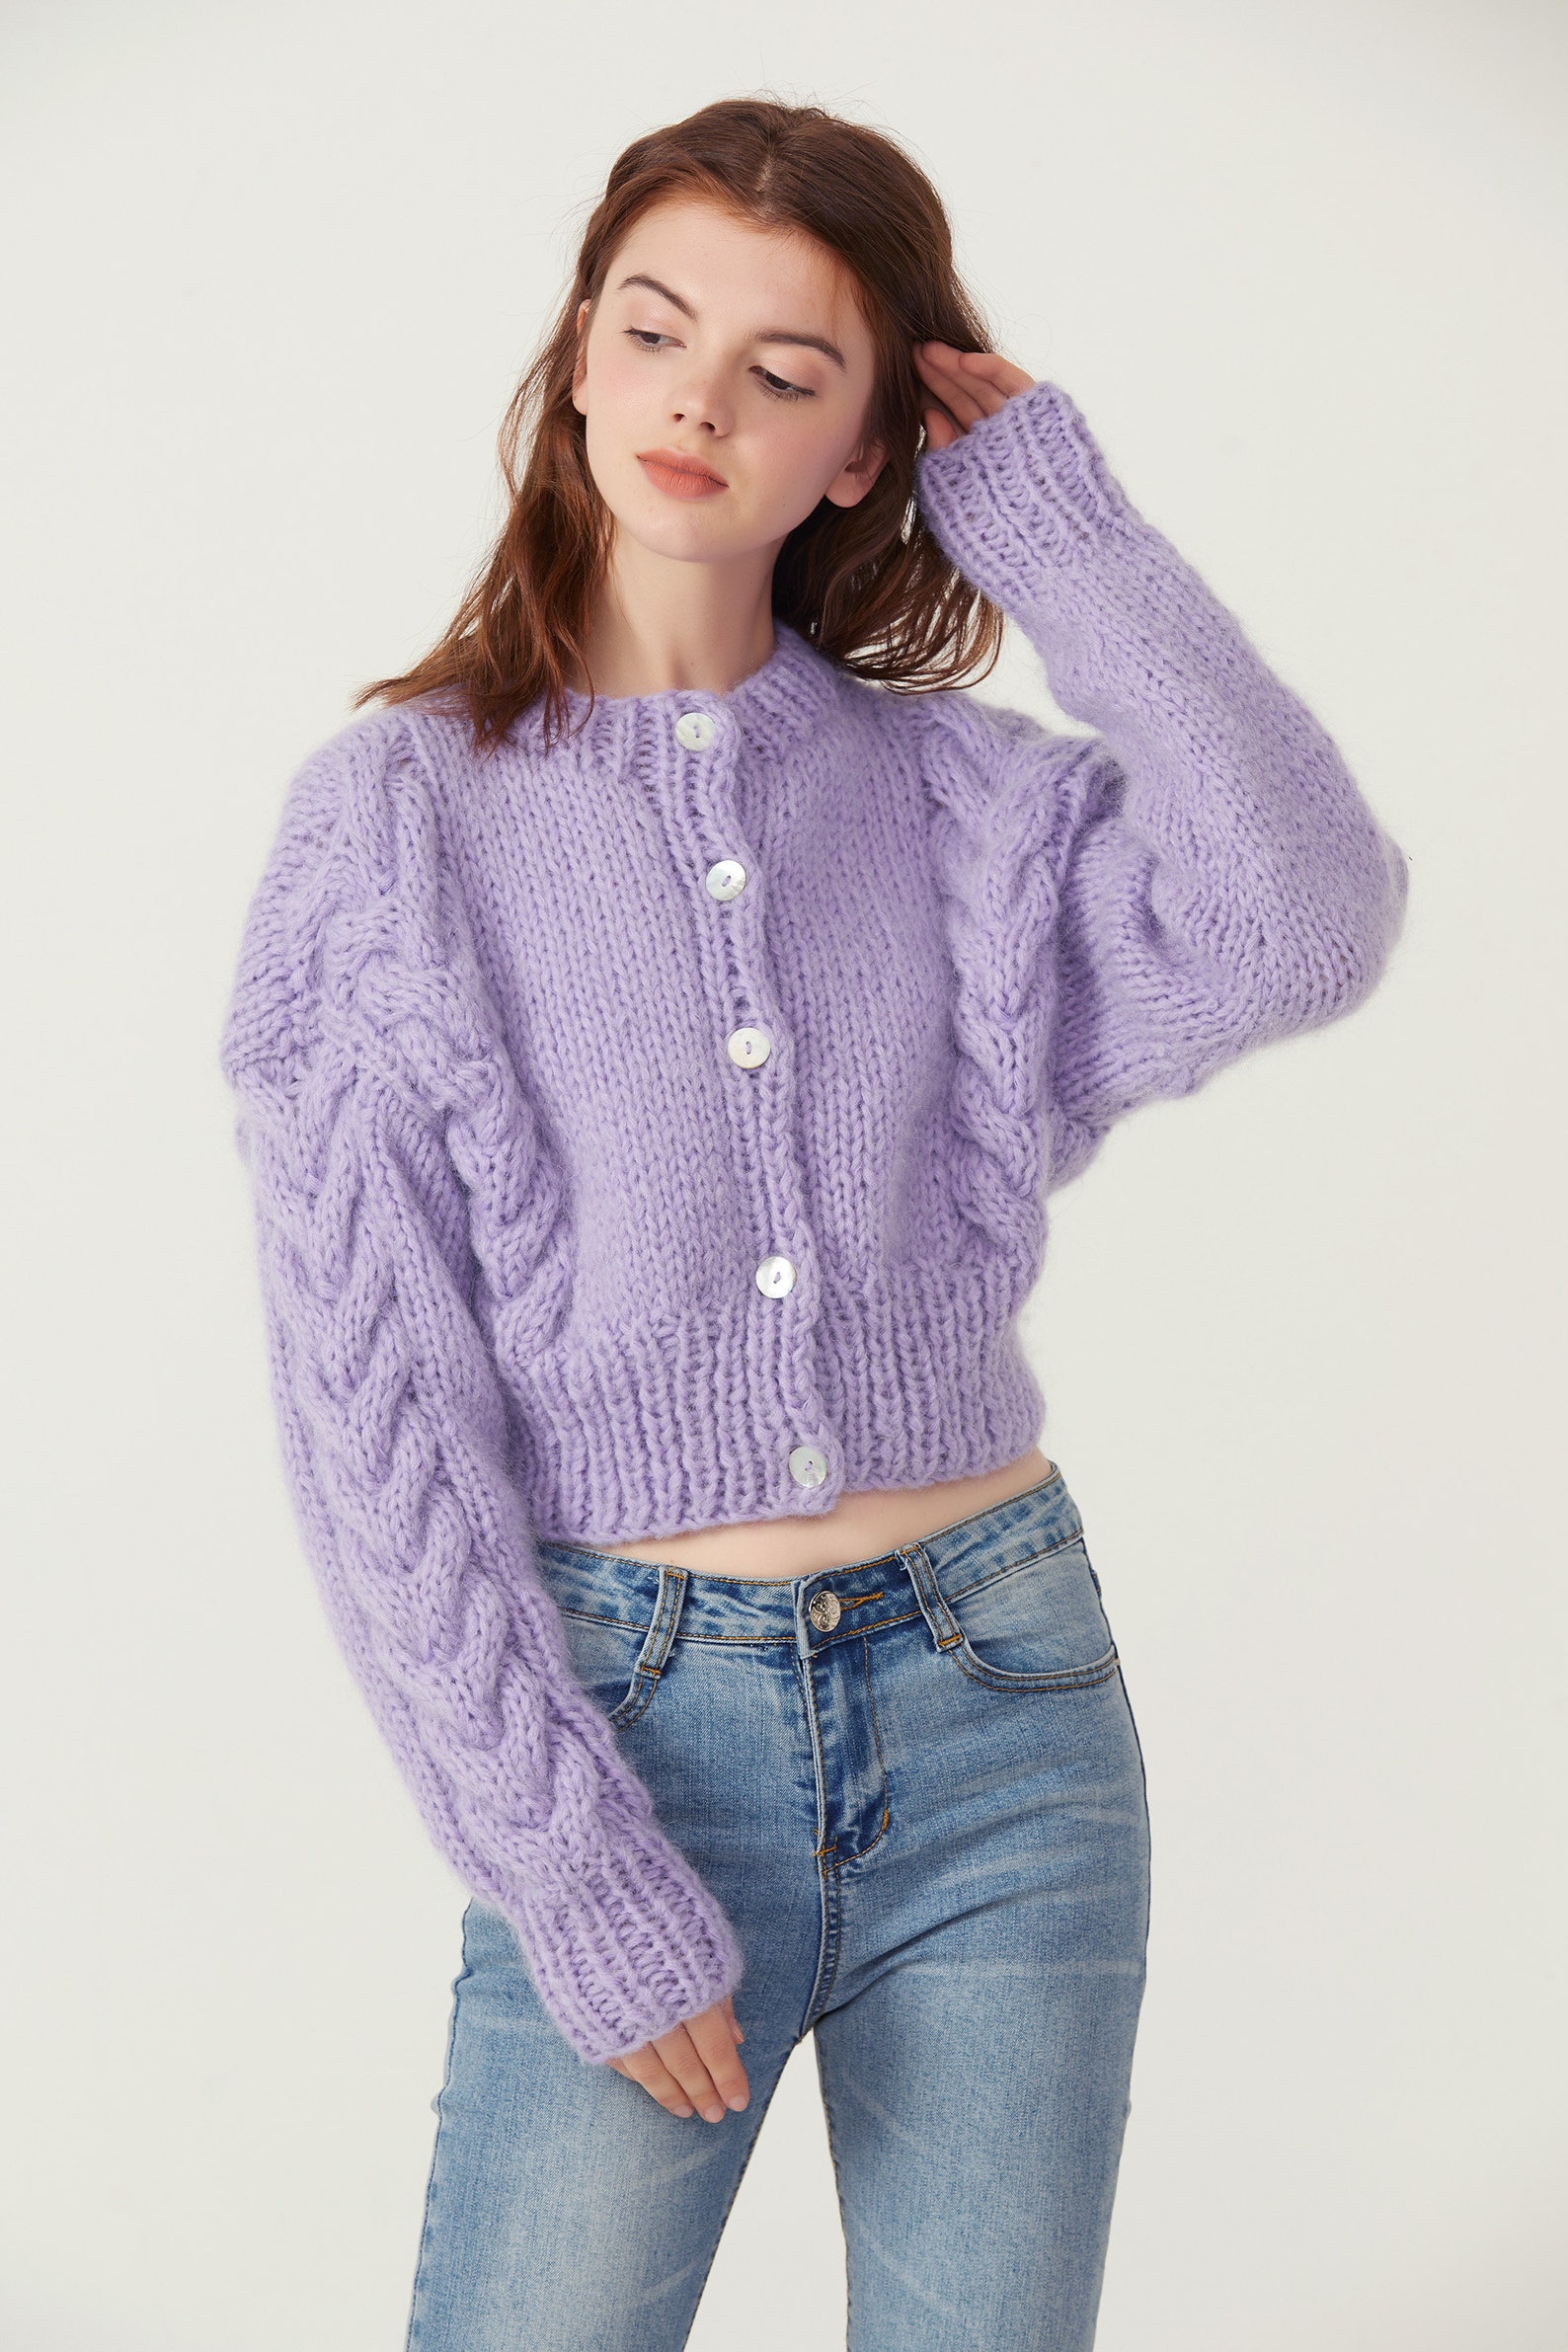 Hand Knit Woman Sweater Mohair Cable Knit Short Cropped - Etsy